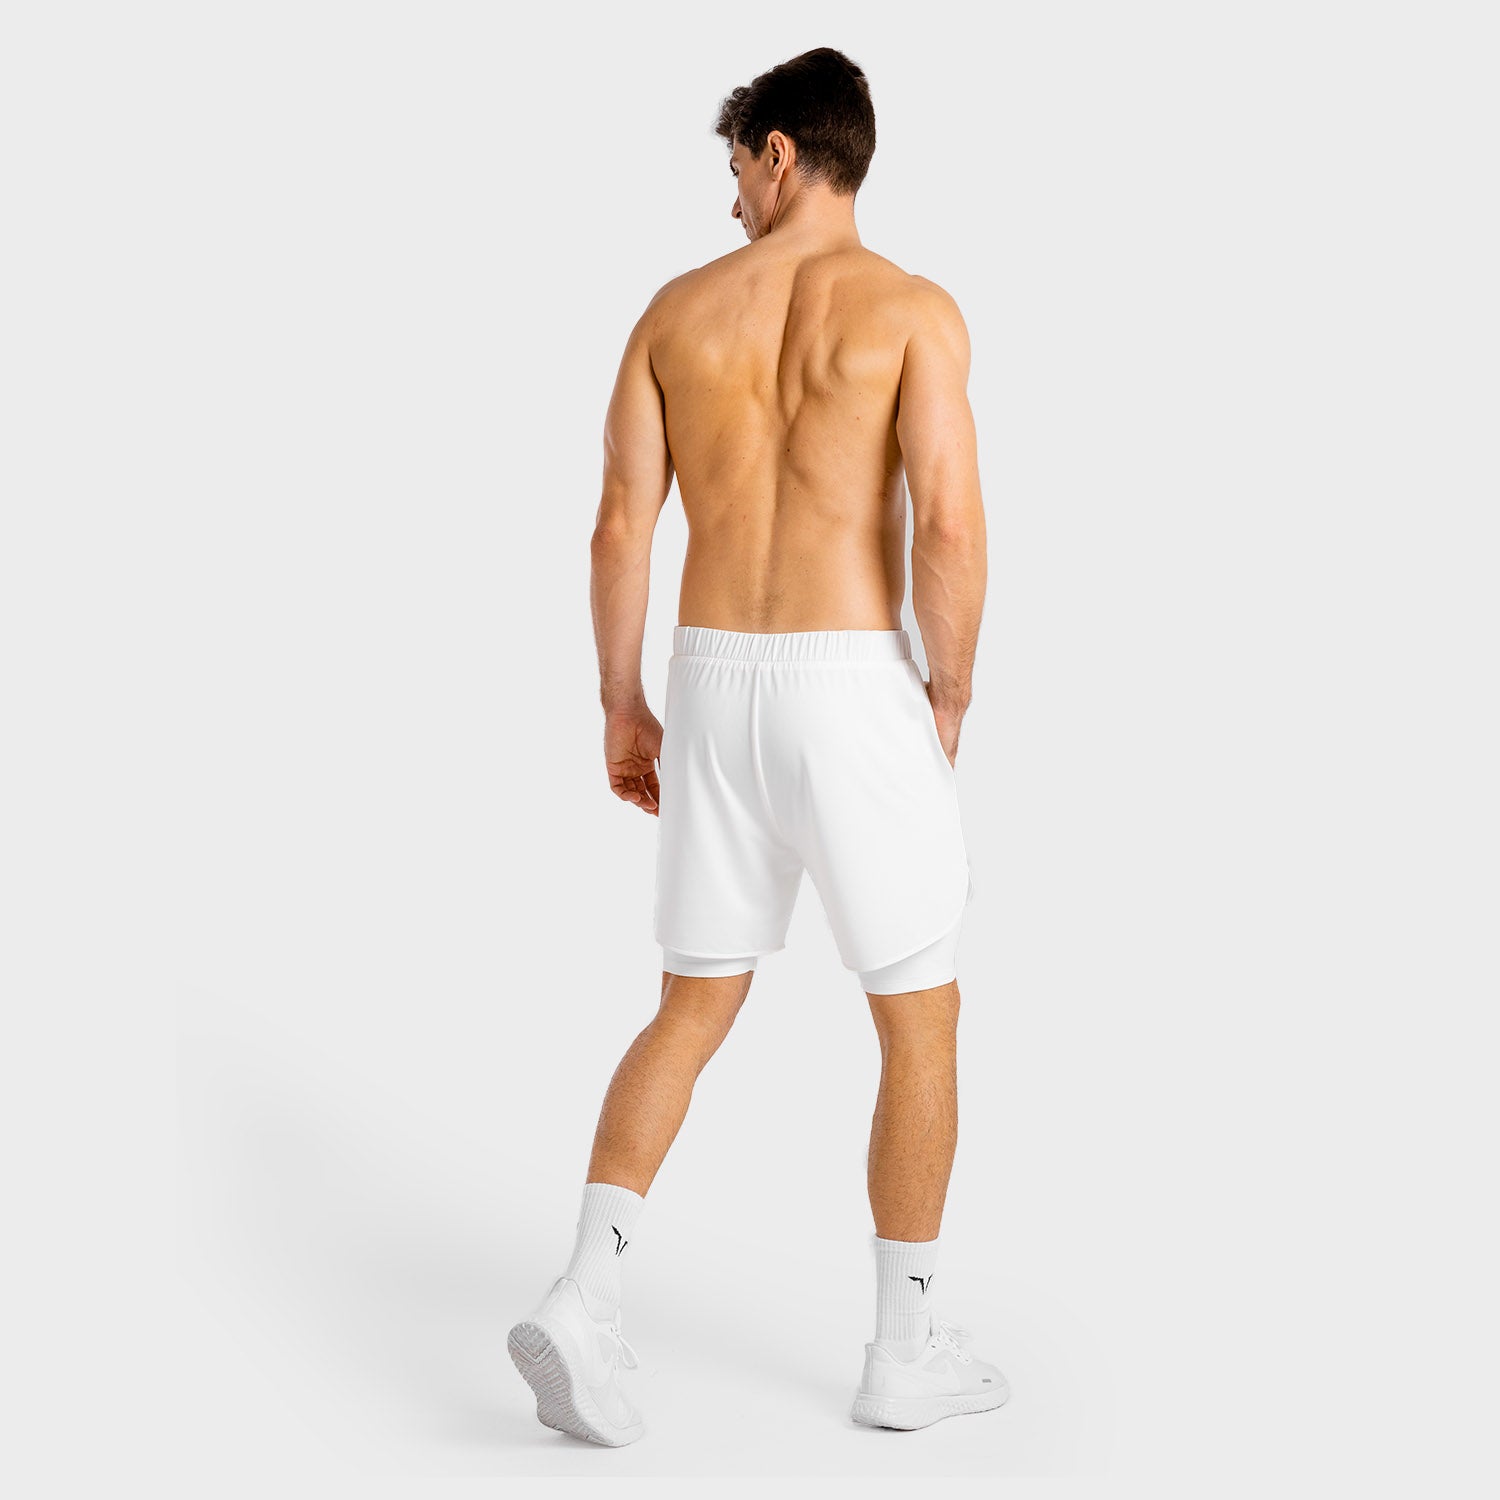 squatwolf-workout-short-for-men-core-mesh-2-in-1-shorts-white-gym-wear